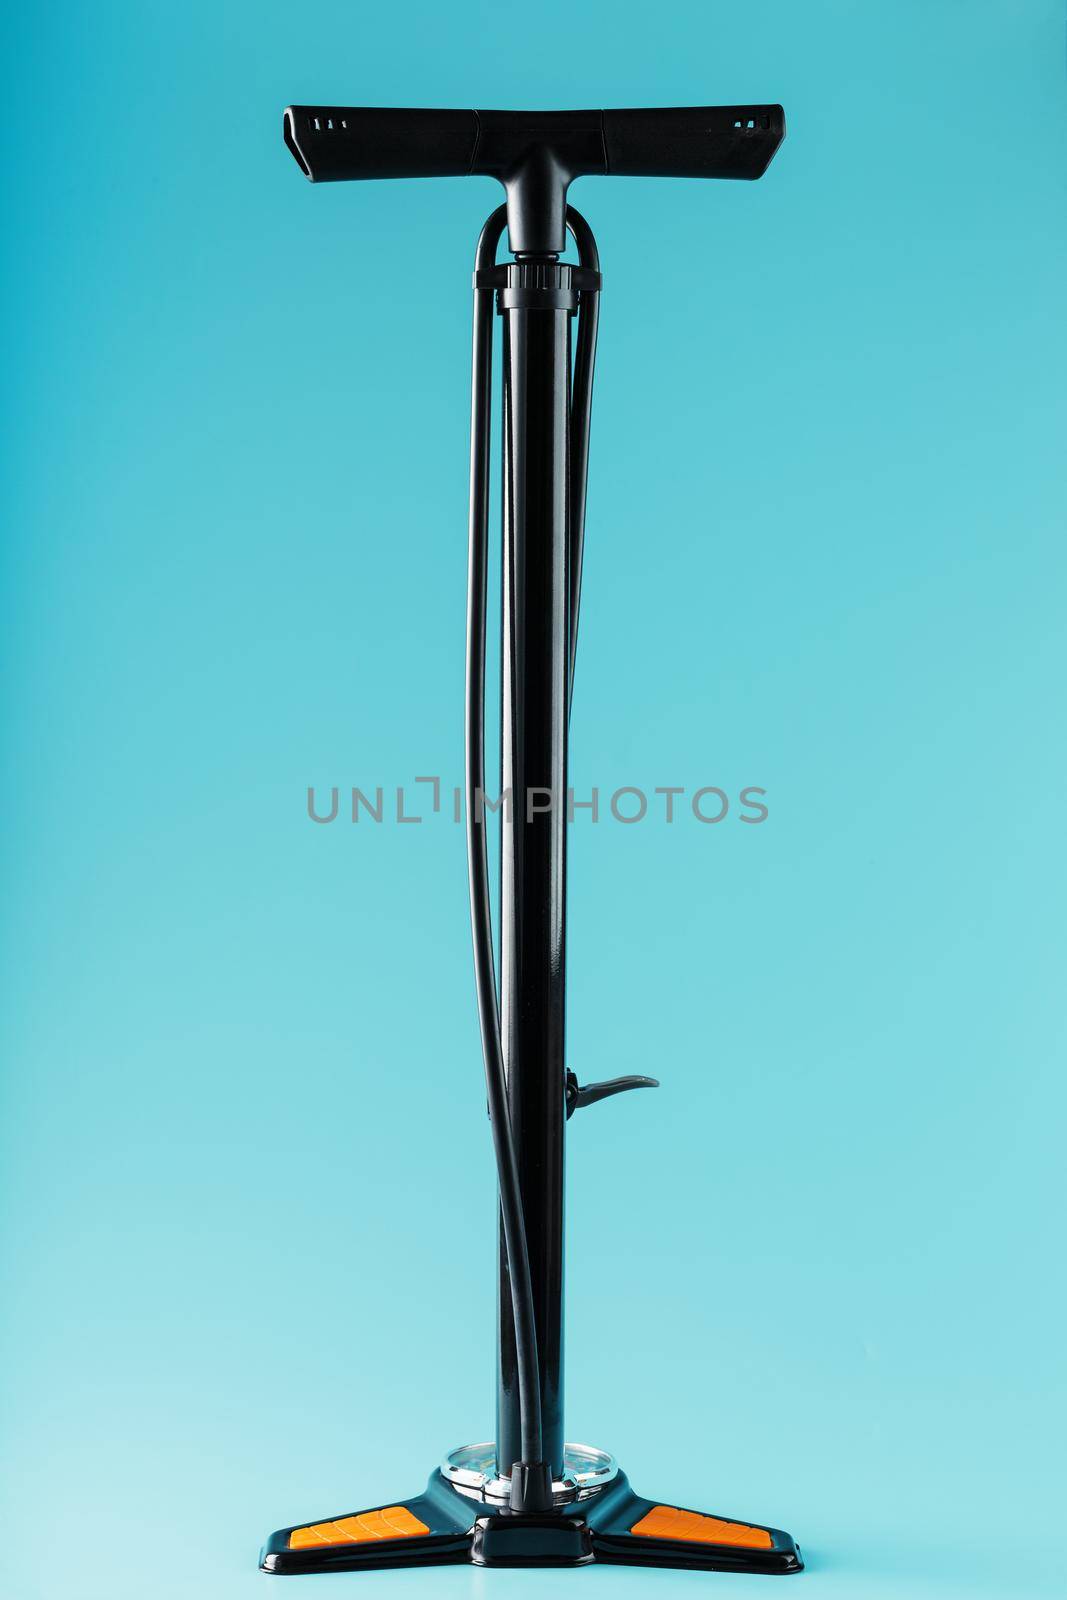 Black bicycle manual air pump for pumping wheels on a blue background with a vertical composition